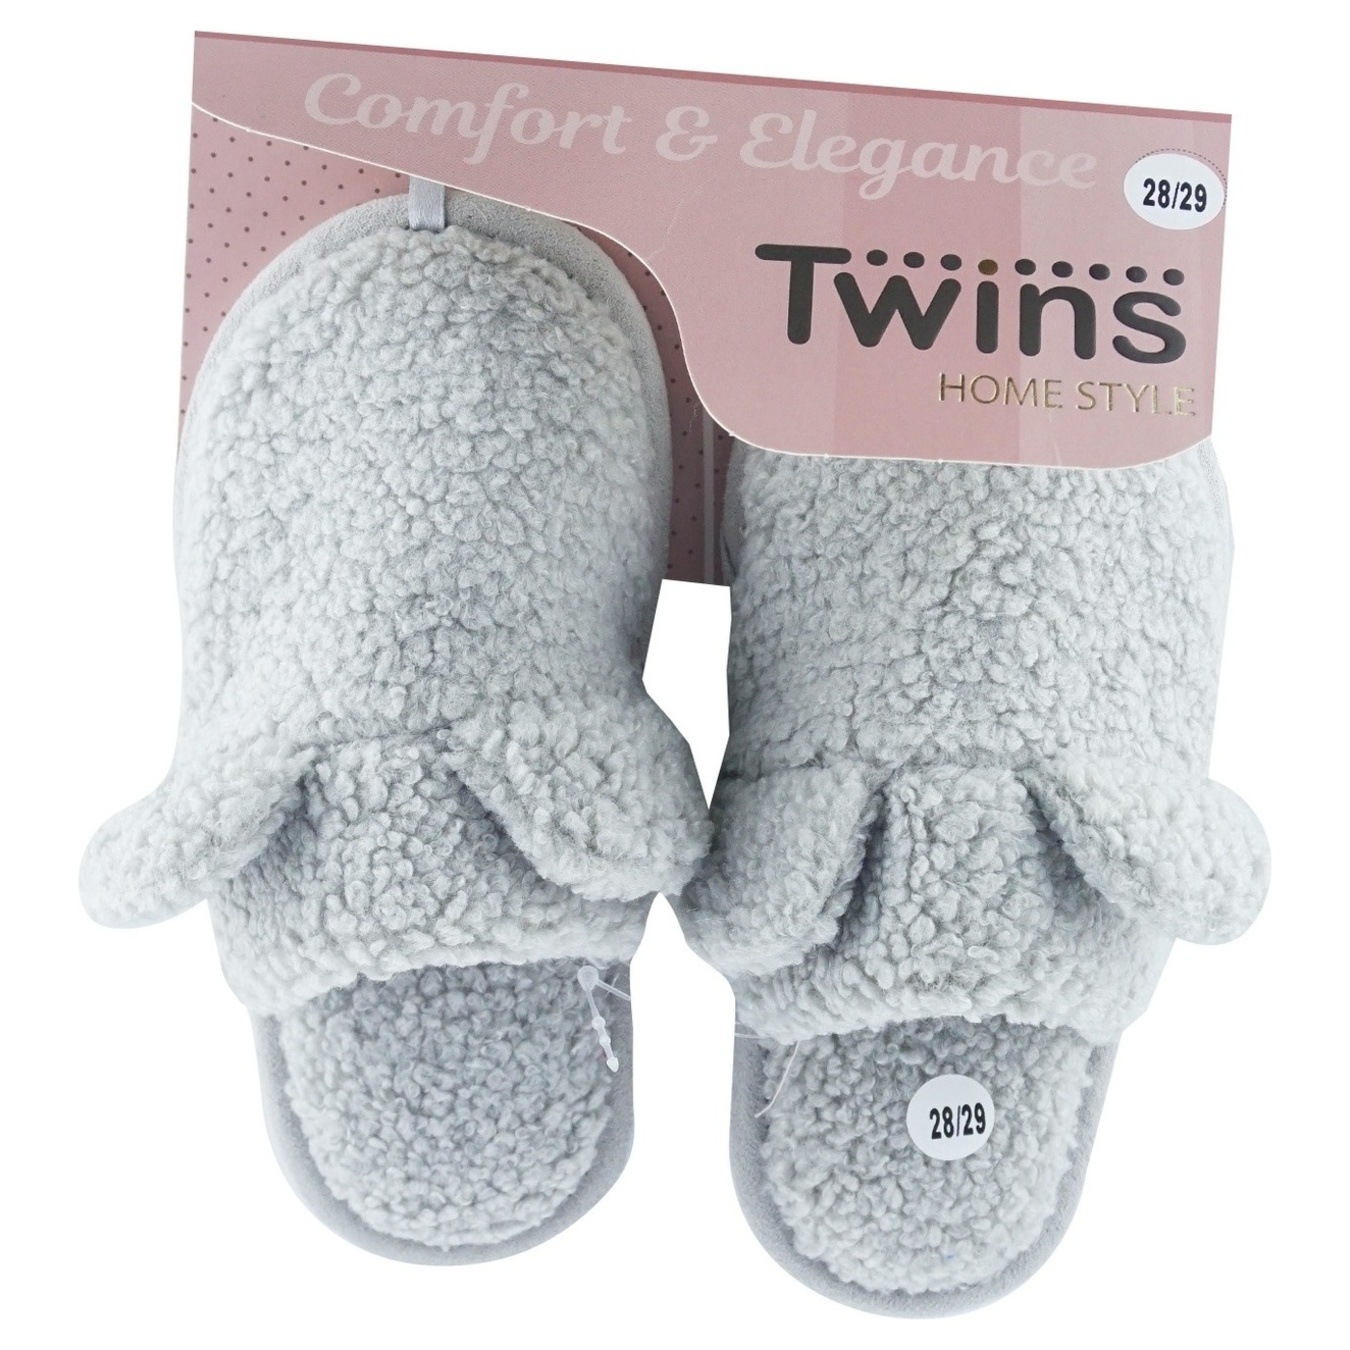 Home slippers for children Twins HS TEDDI fur size 28-35